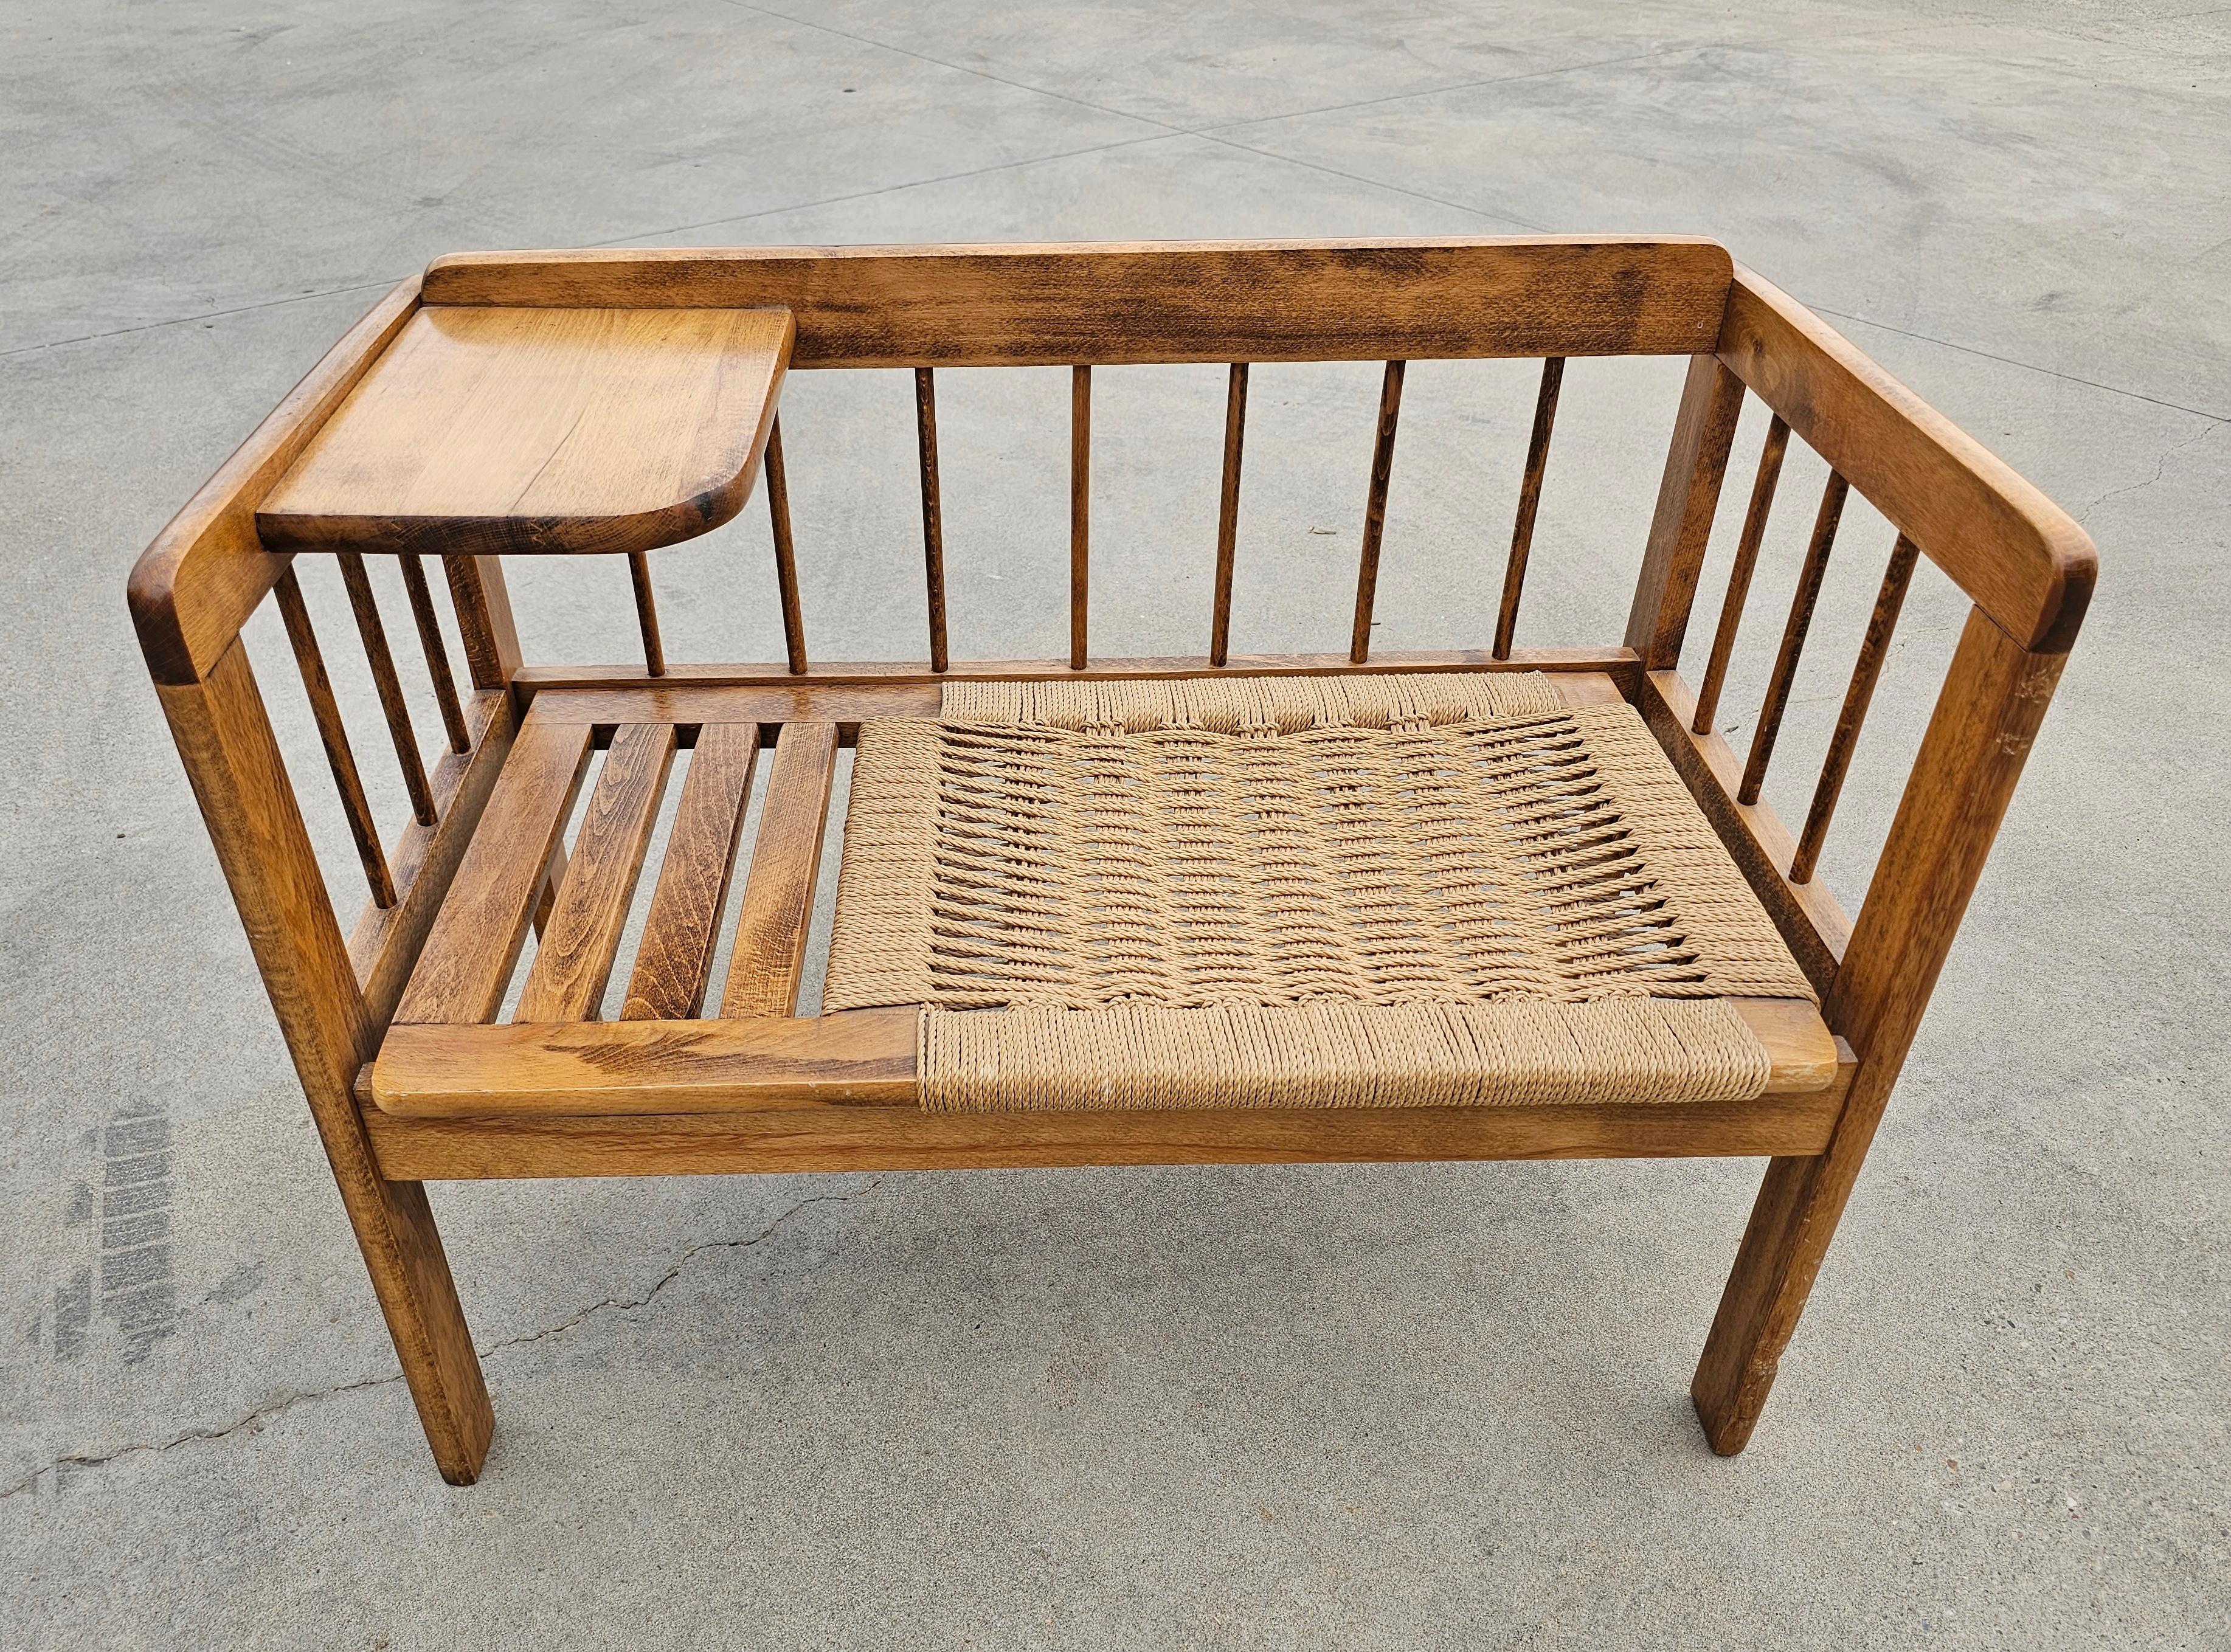 In this listing you will find an extremely rare Telephone Bench done in oak, with seats woven with Danish paper cord, designed in style of Hans J. Wegner. Also known as Gossip Bench, this unique piece of furniture works perfectly as the entryway